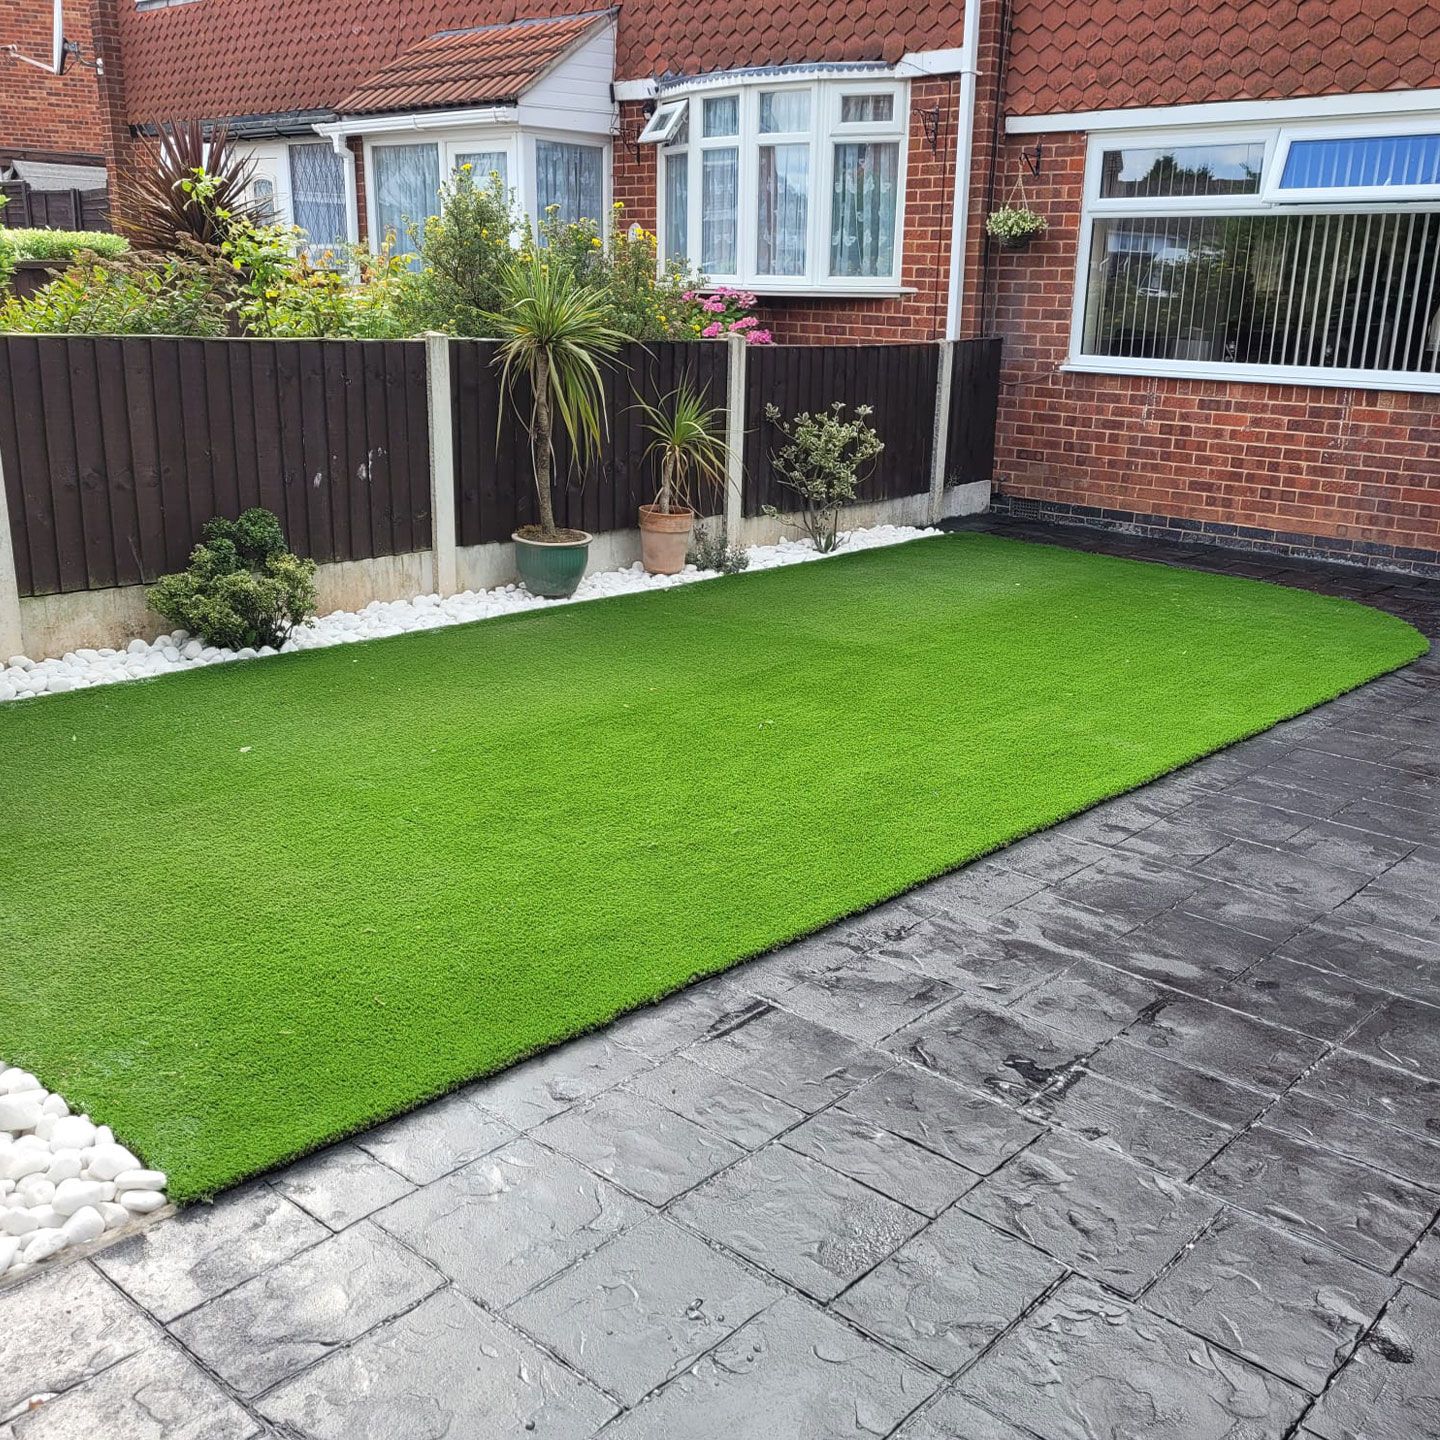 landscaping in Leamington Spa showing new artificial grass and patterned concrete paving